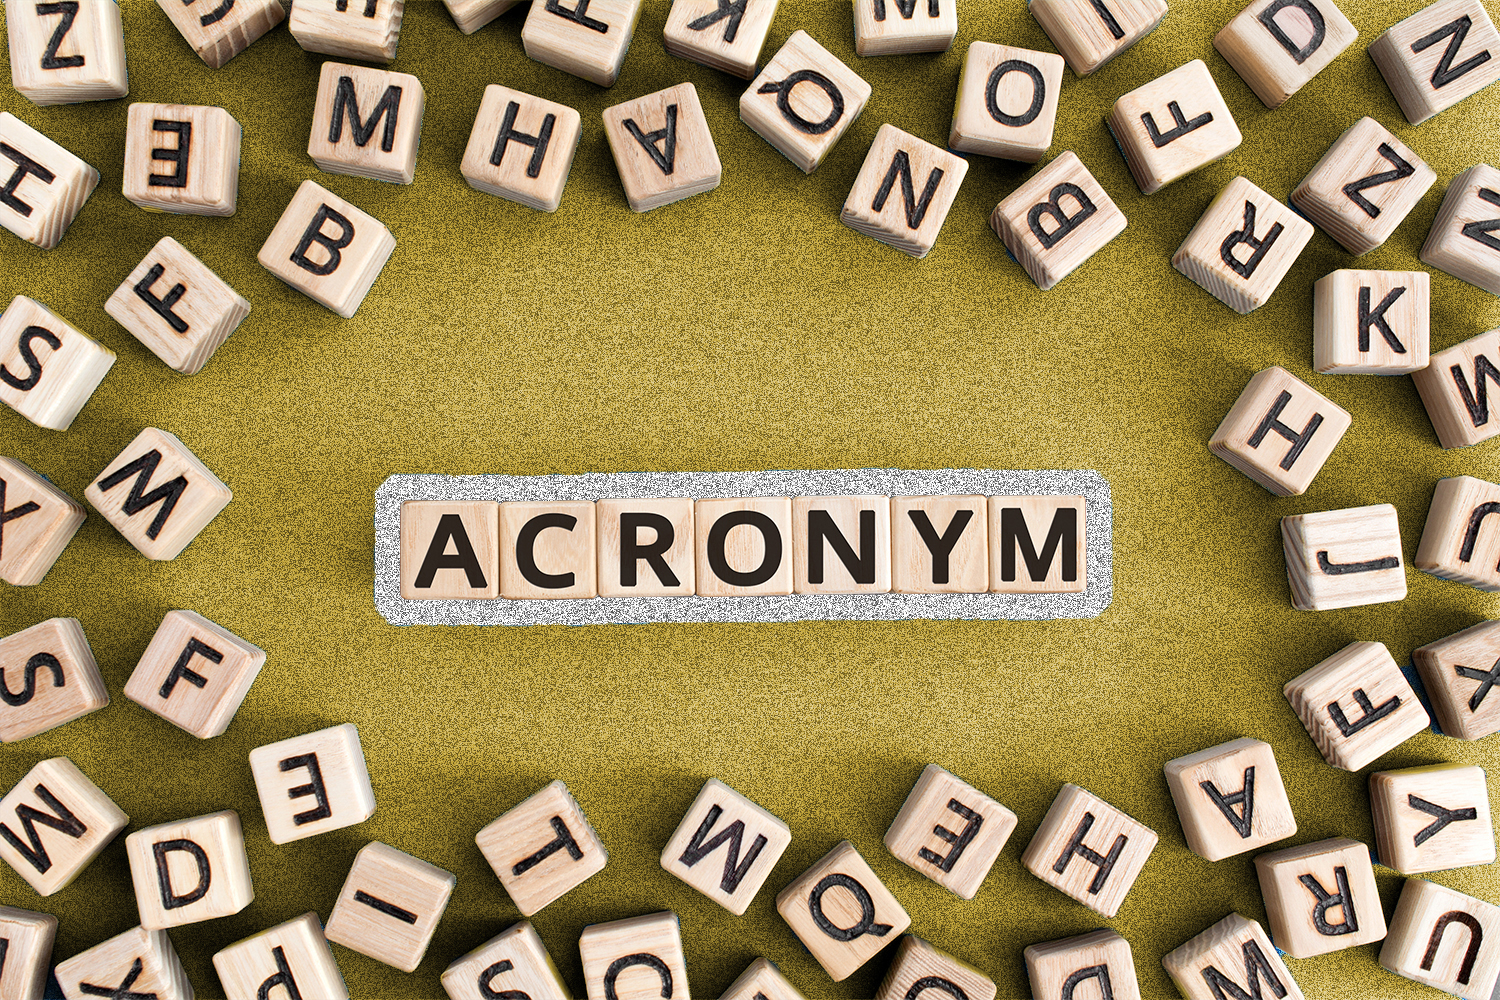 A gold background behind wooden block letters that spell out "acronym."